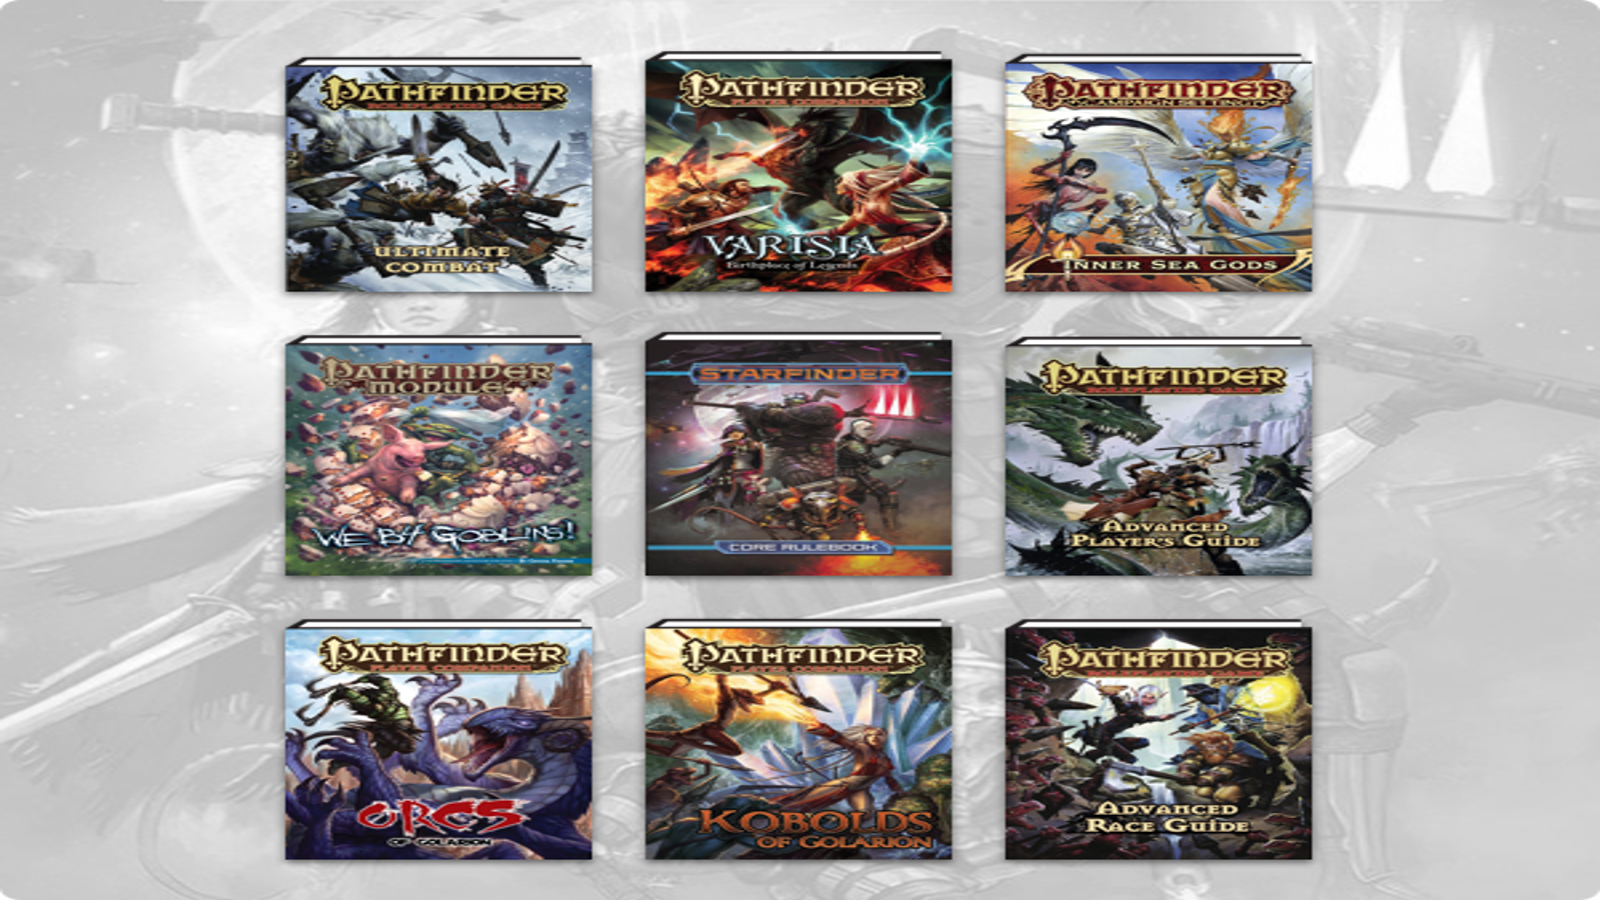 A huge stack of Pathfinder RPG manuals are available from $1 in